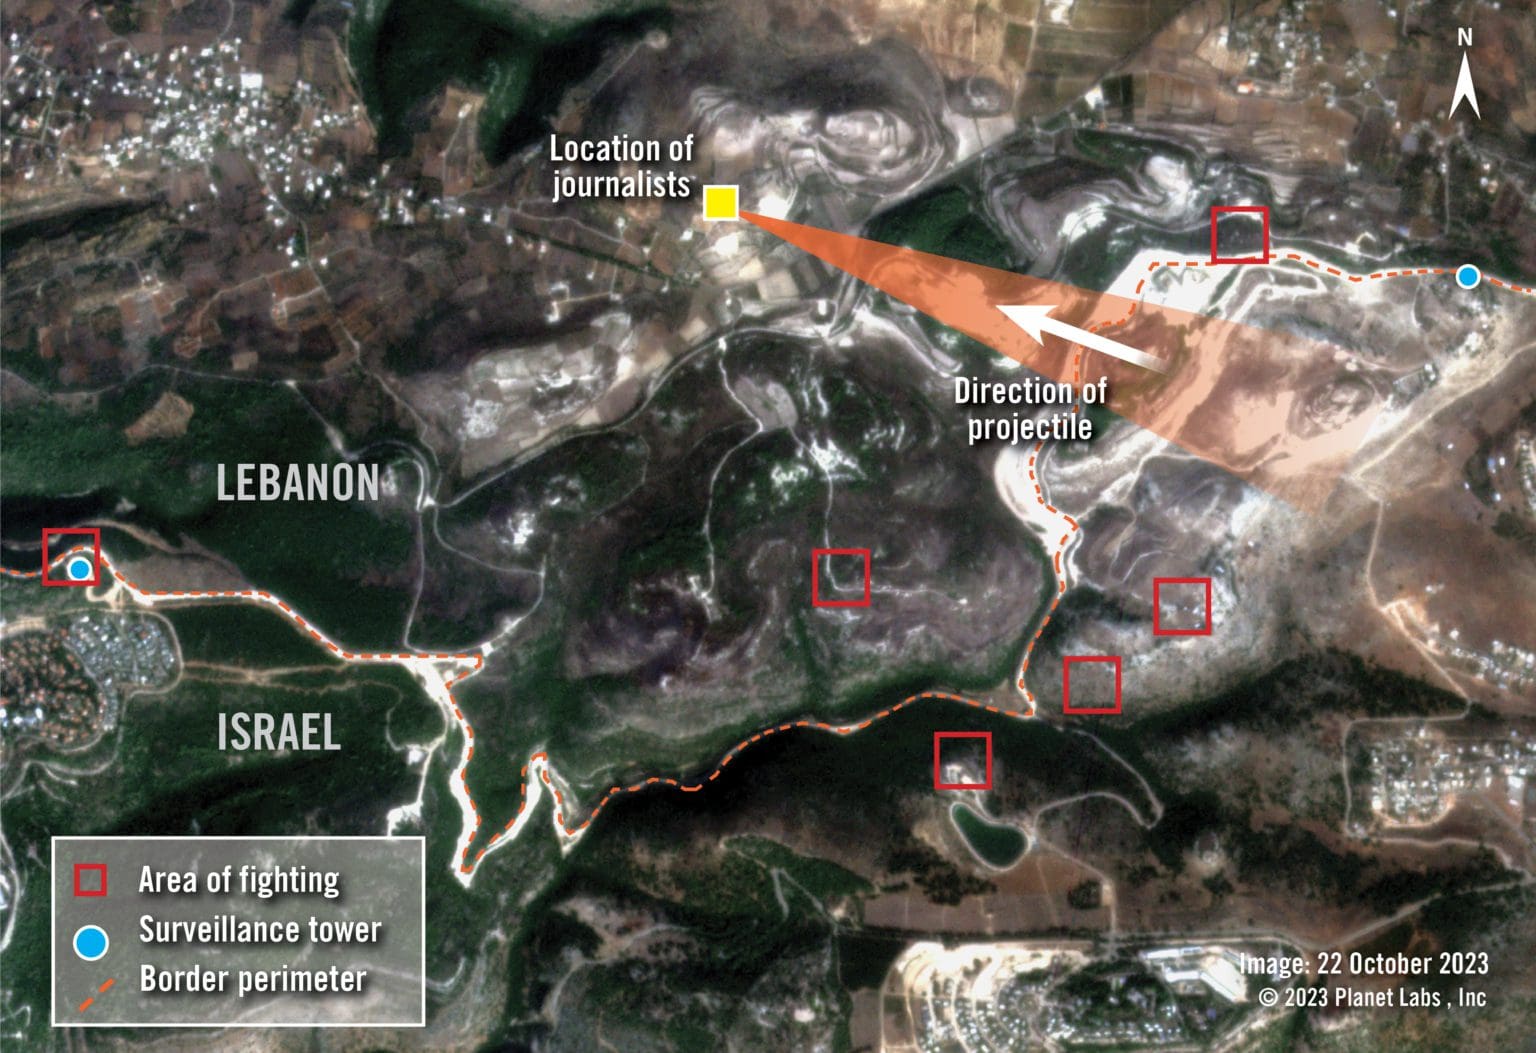 An overview image of the area shows the border perimeter, surveillance towers and areas of fighting recorded by the journalists before they were struck. The direction of the projectile and area from which it originated is also shown.